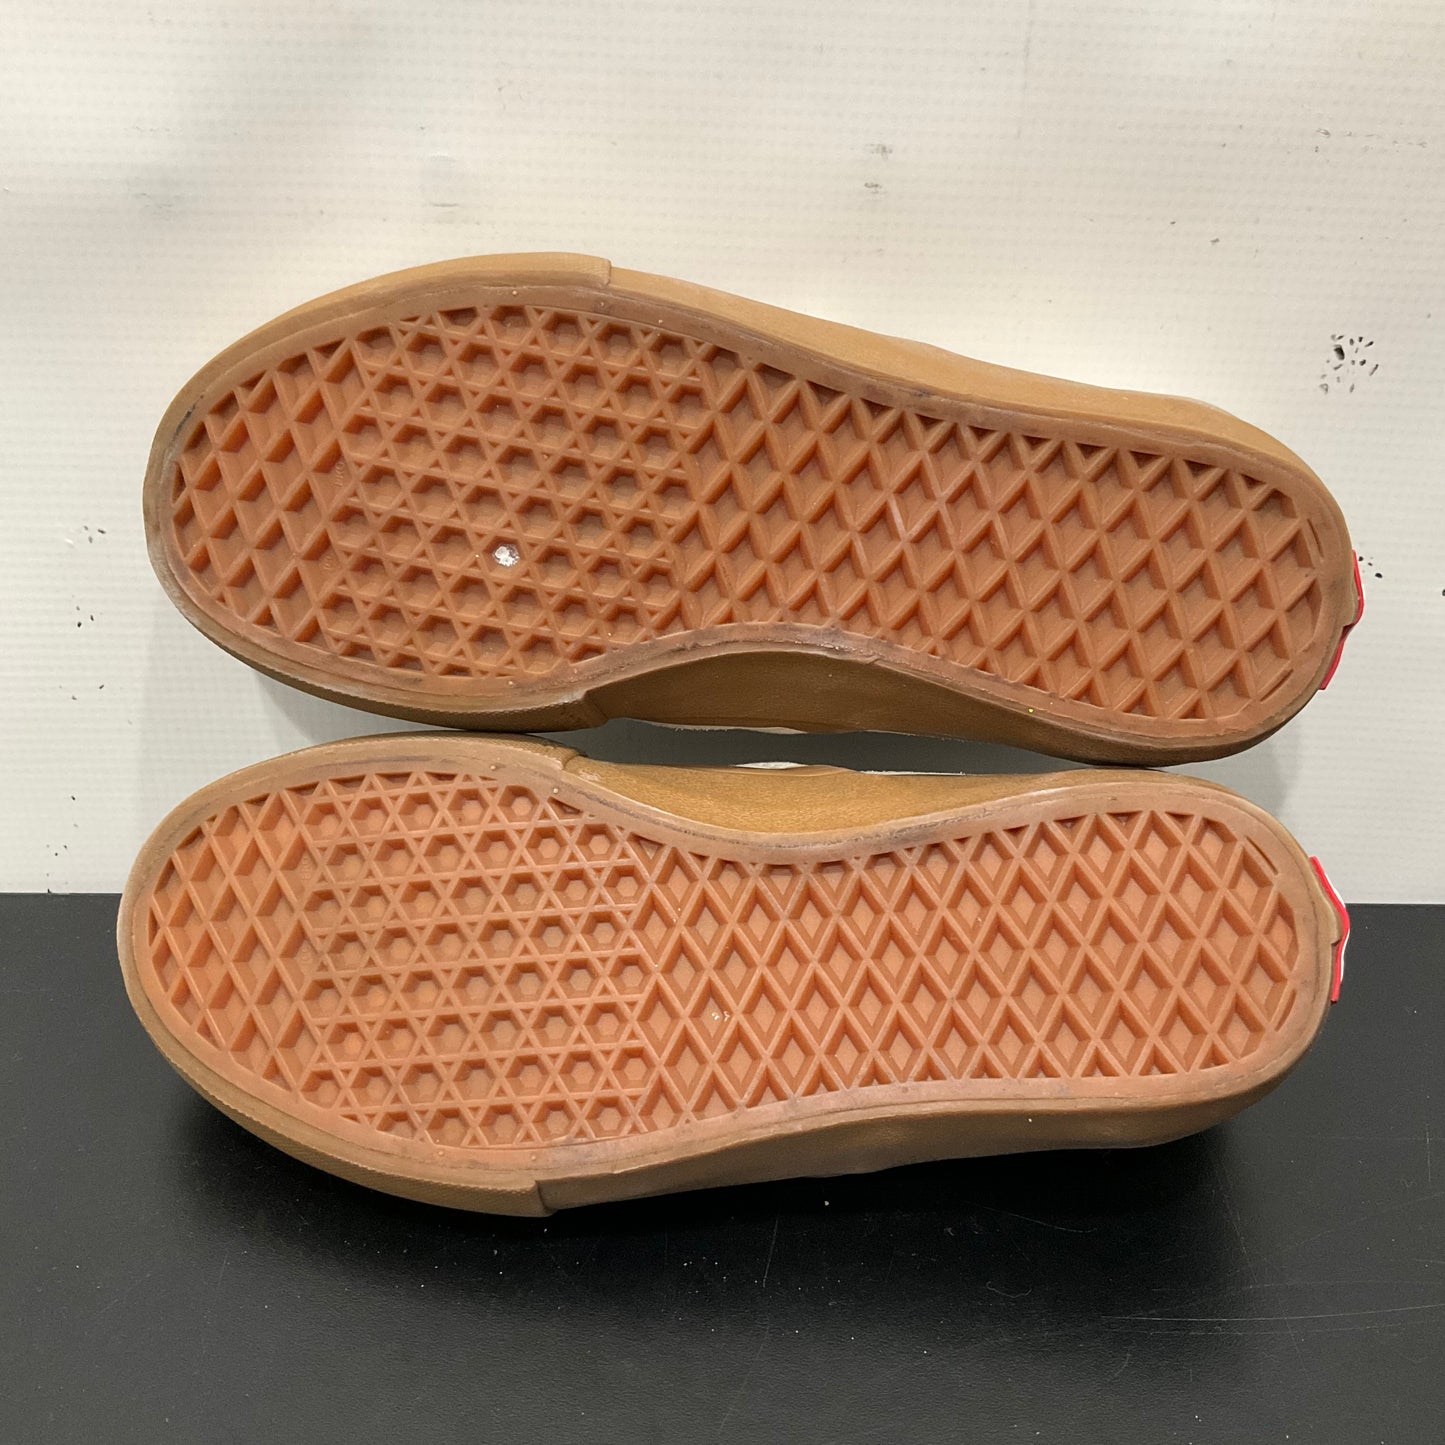 Shoes Flats Other By Vans  Size: 7